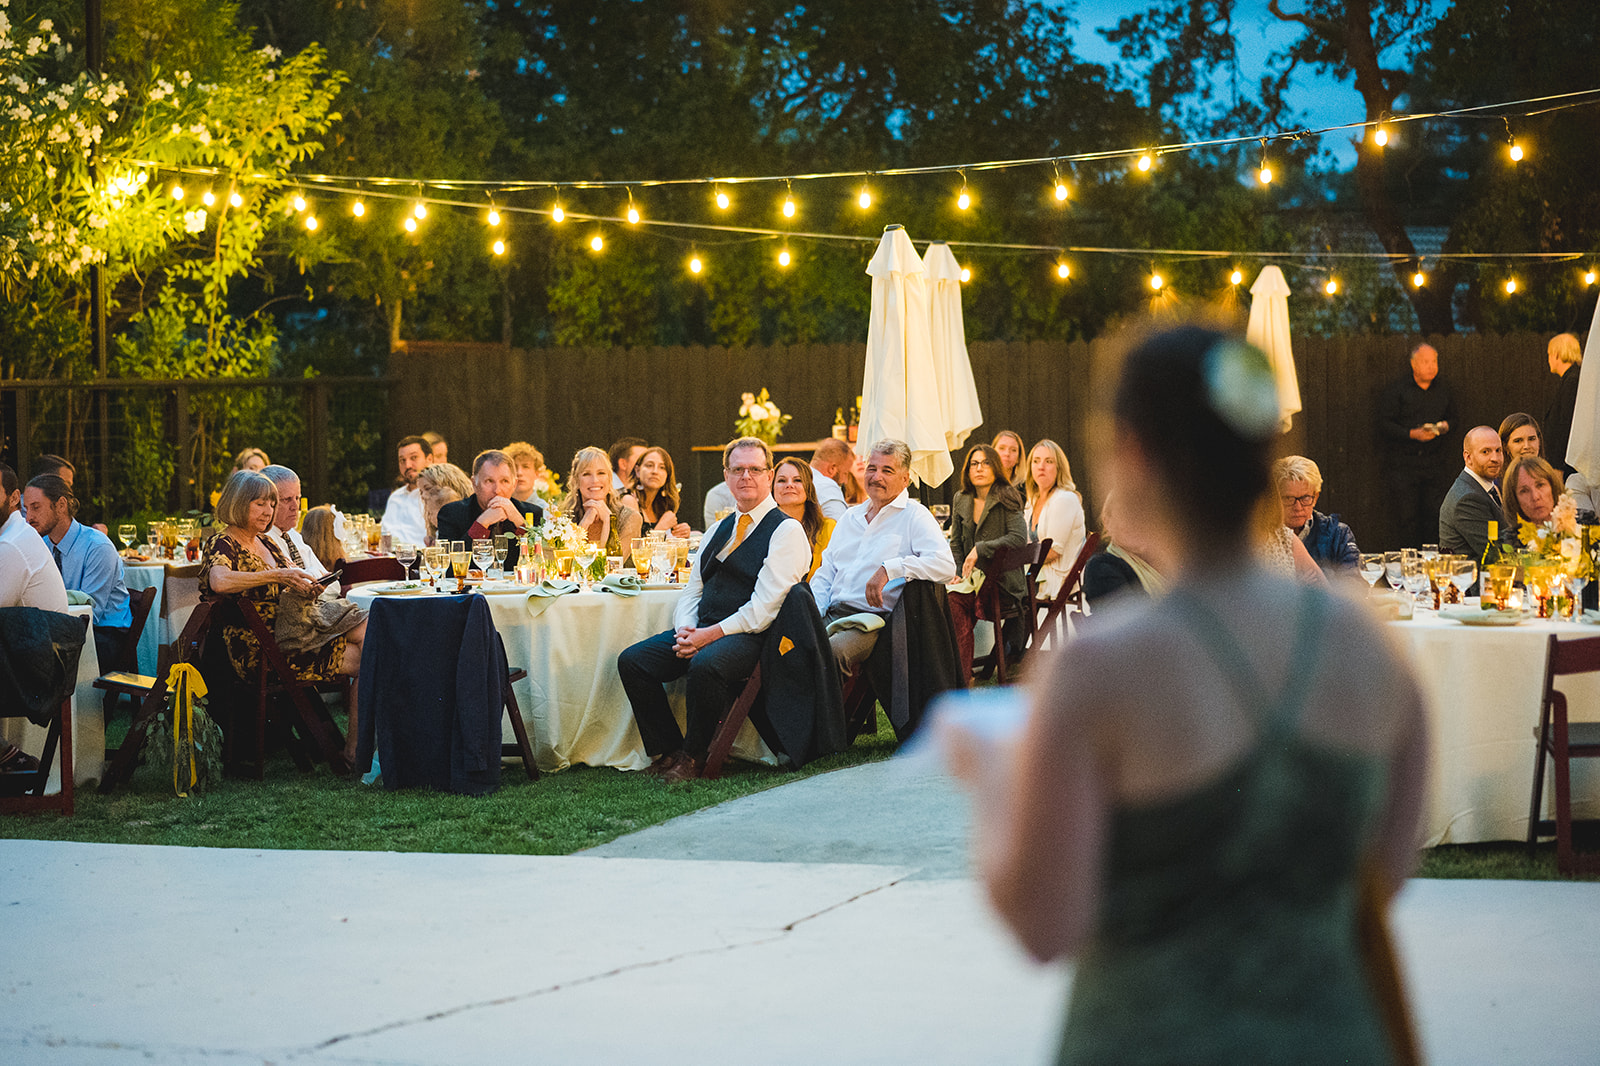 Emotional toasts and speeches during the elegant Napa Valley wedding reception